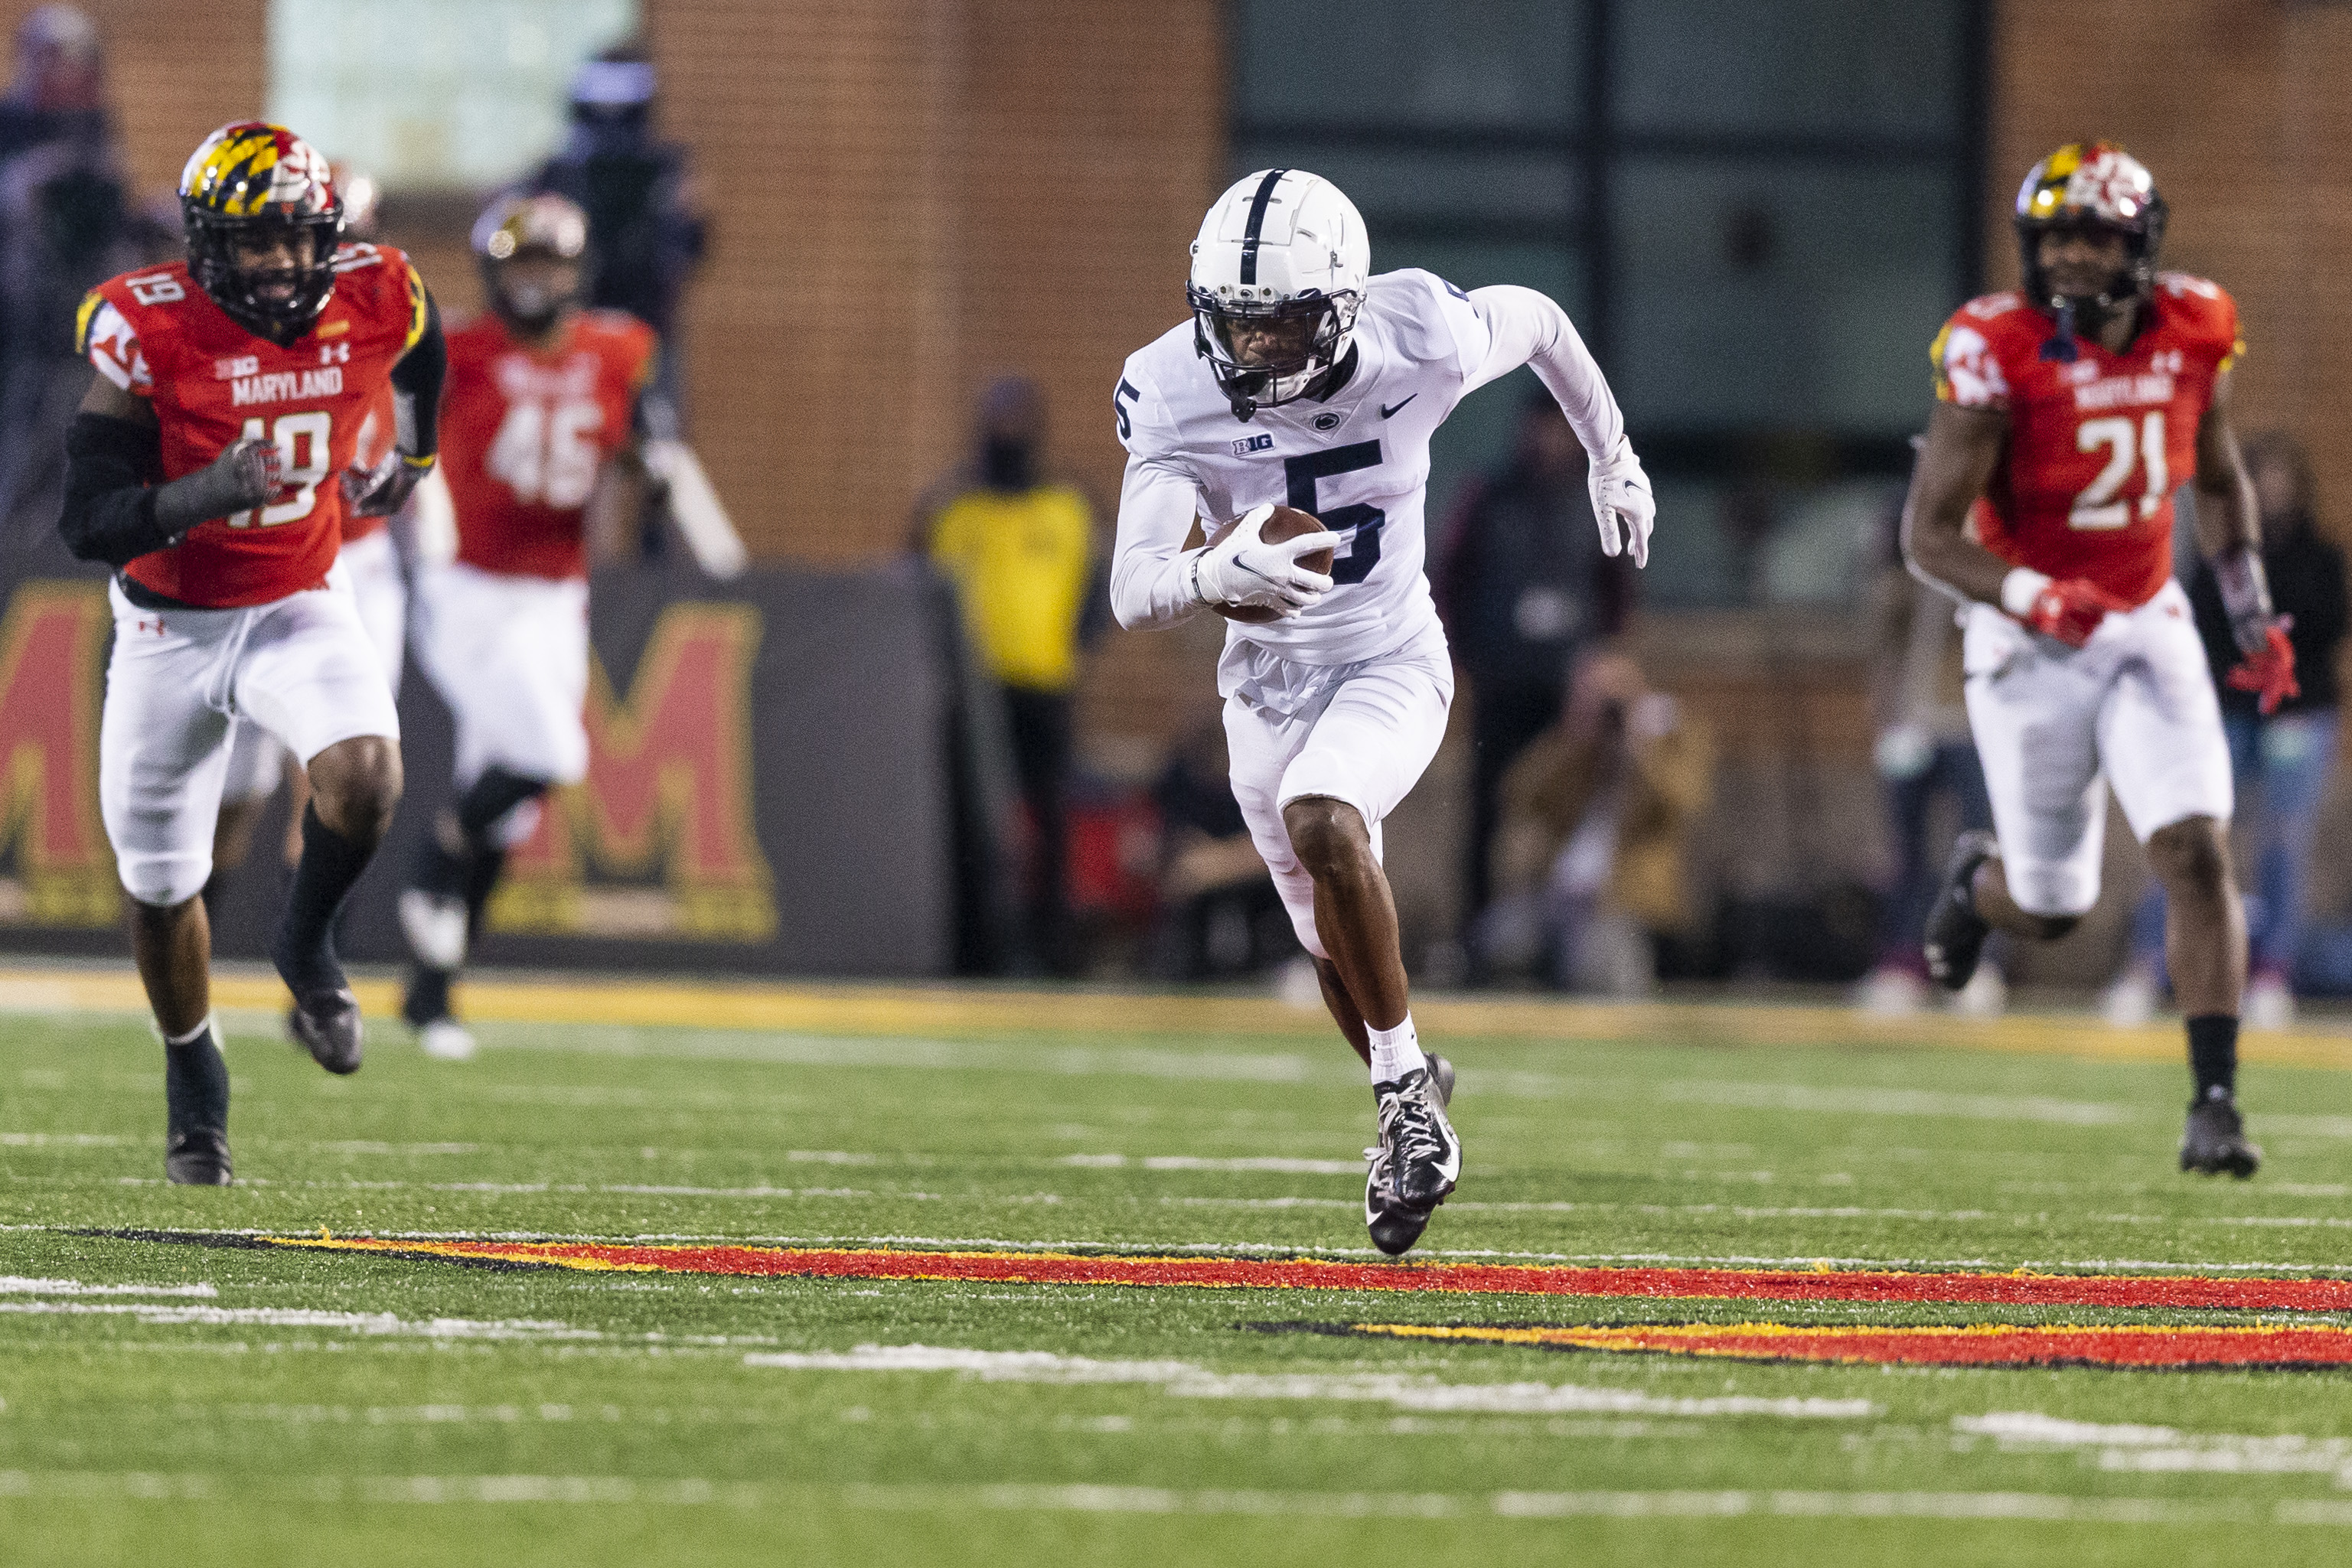 Penn State wide receiver Jahan Dotson goes in for an 86-yard touchdown catch and run during the fourth quarter on Nov. 6, 2021. Joe Hermitt | jhermitt@pennlive.com